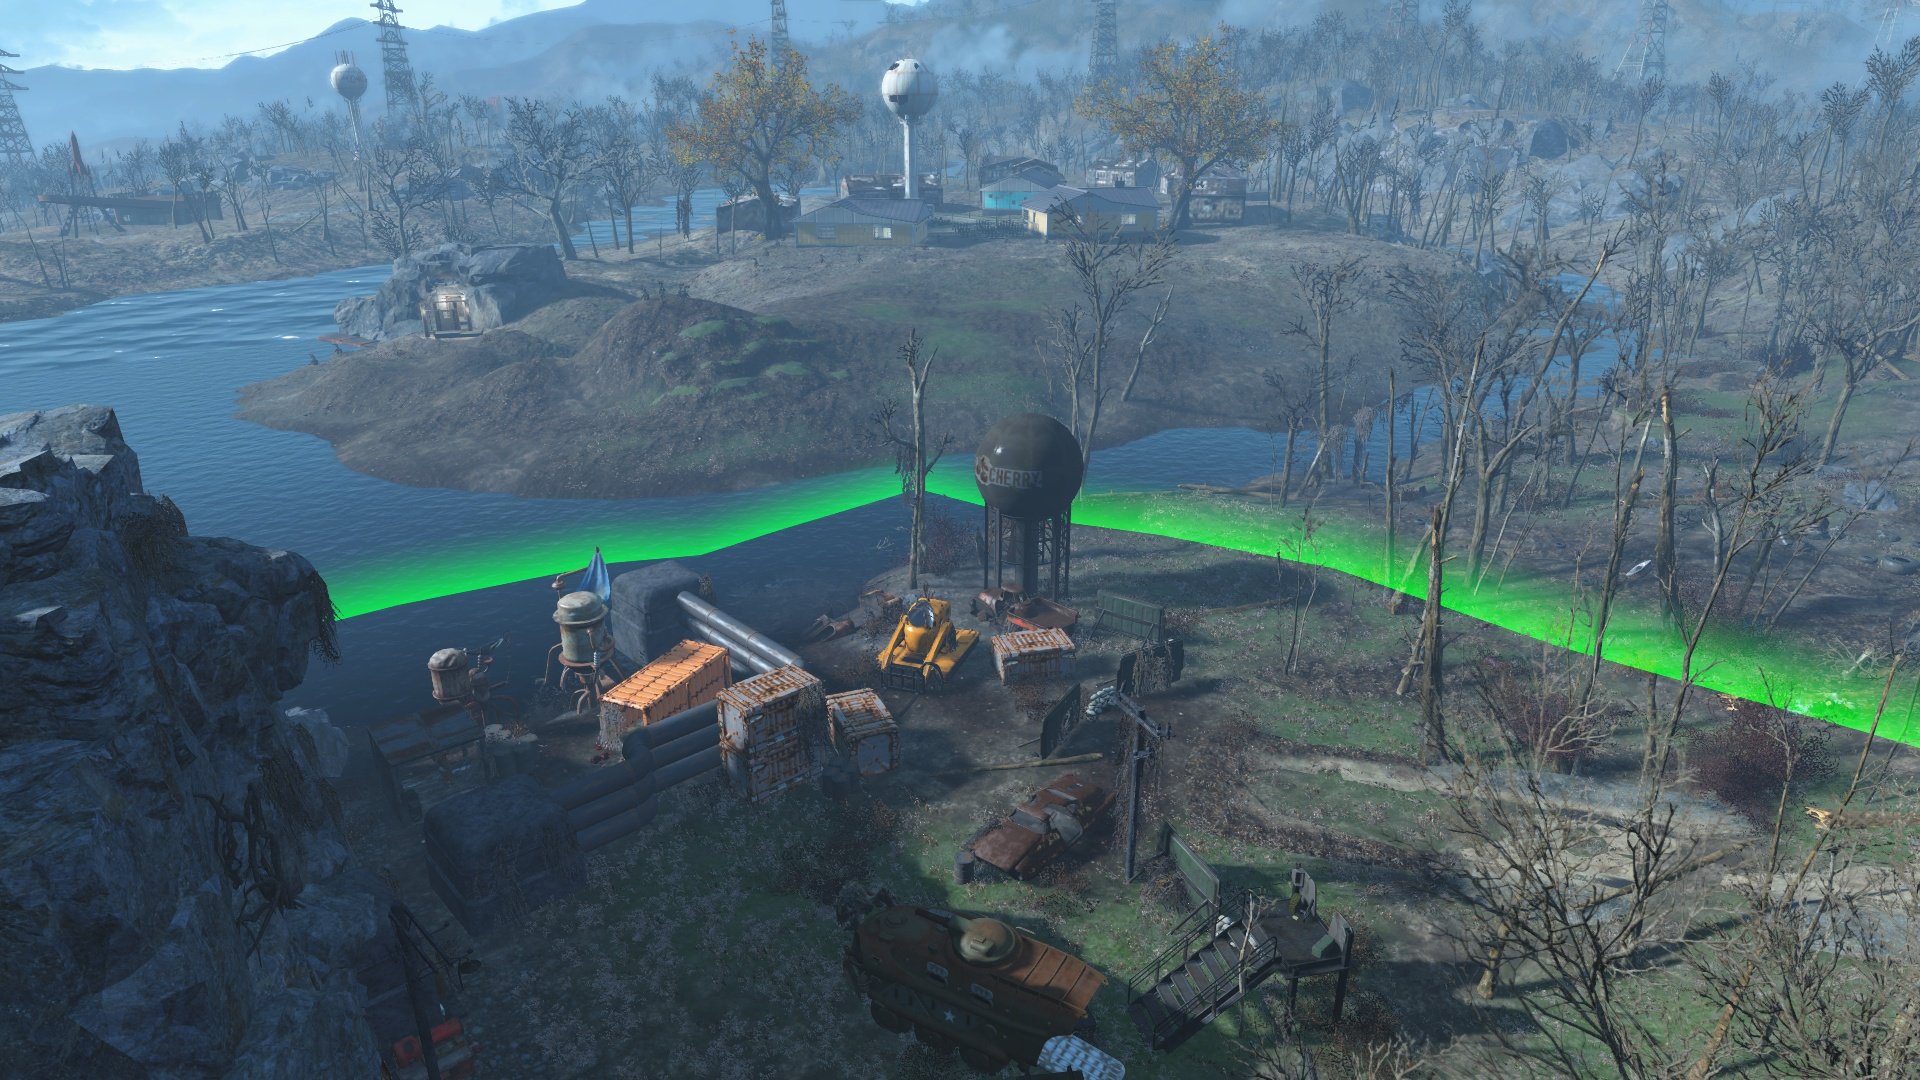 Conquest build new settlements and camping fallout 4 на русском фото 54